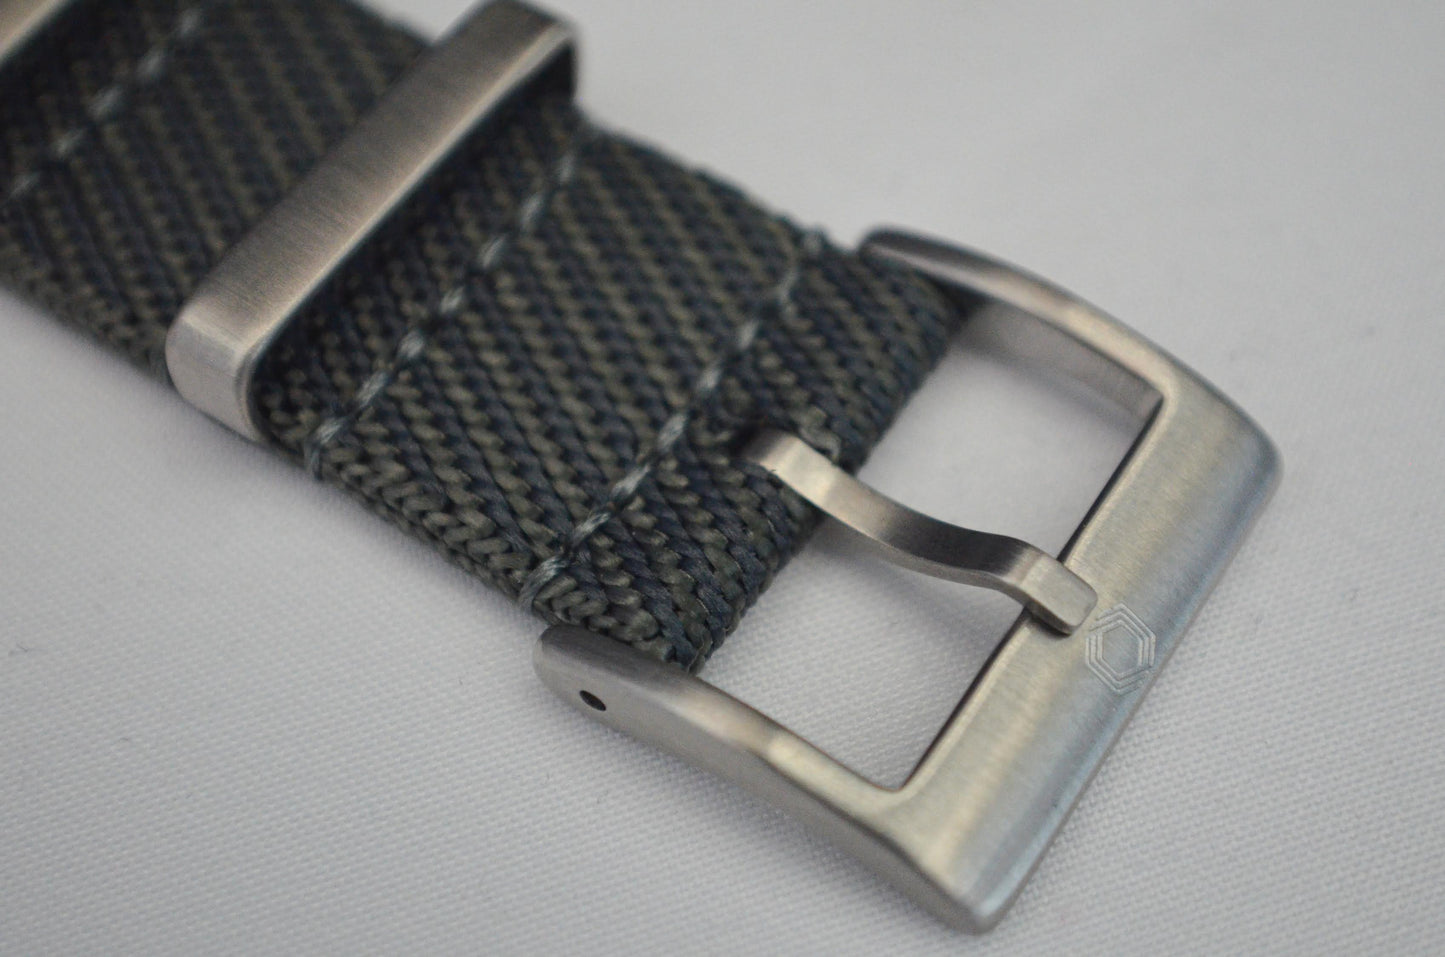 The 'Manitoba' - Single pass grey watch strap made of a soft weaved nylon